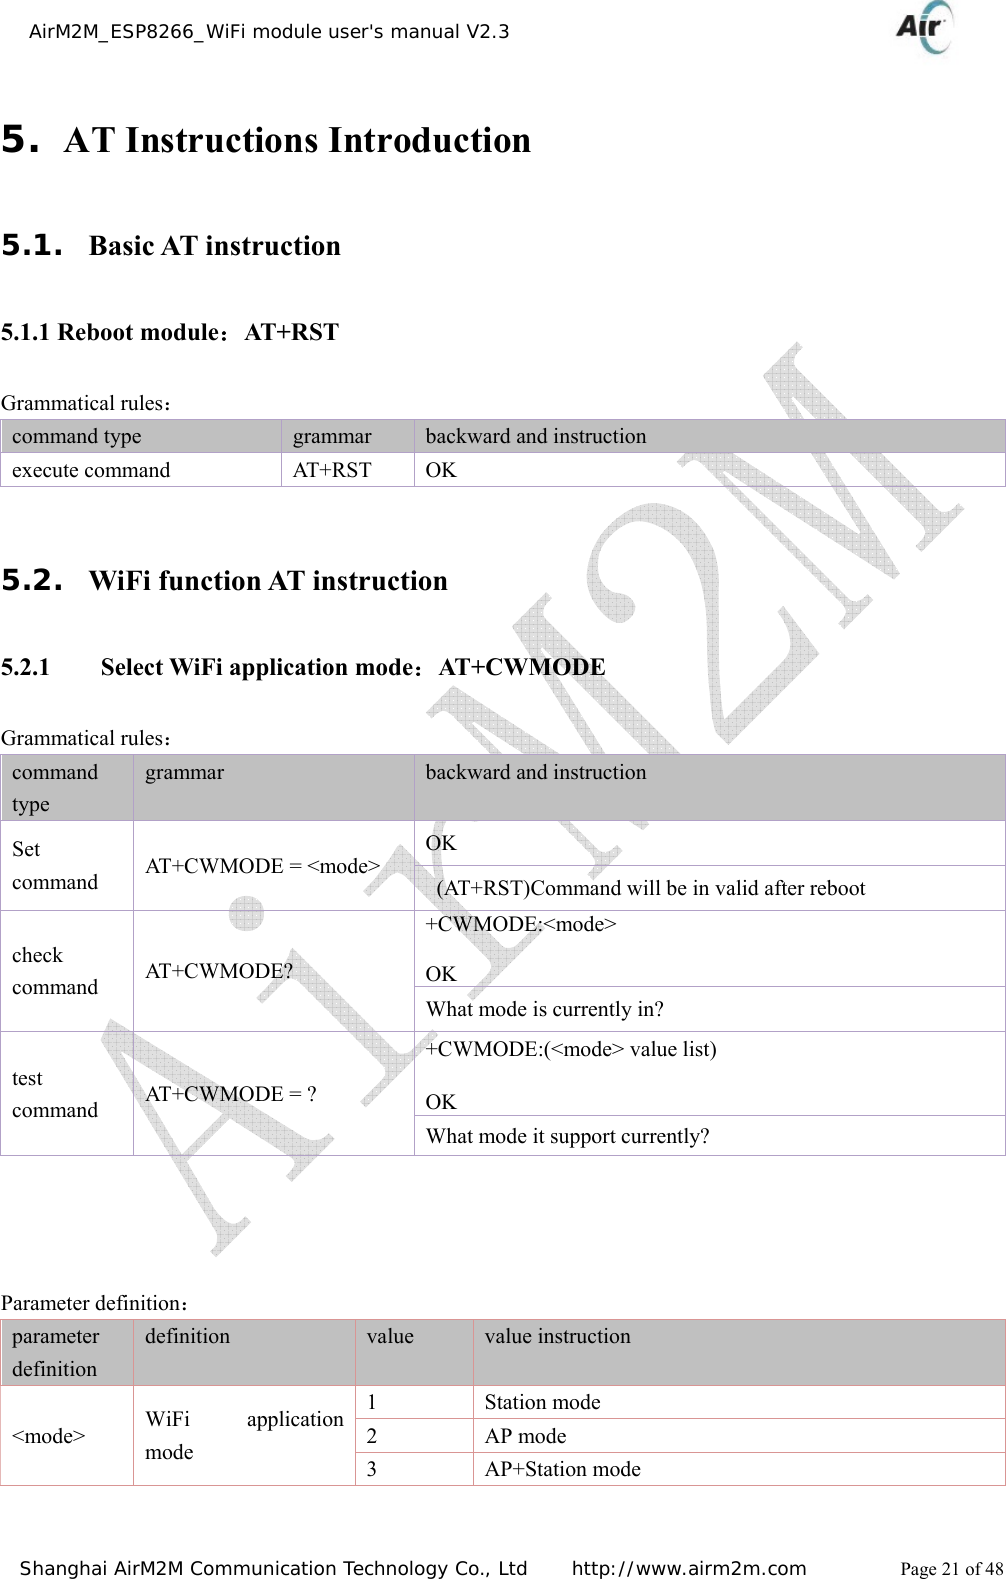    AirM2M_ESP8266_WiFi module user&apos;s manual V2.3   Shanghai AirM2M Communication Technology Co., Ltd     http://www.airm2m.com          Page 21 of 48 5.   AT Instructions Introduction 5.1. Basic AT instruction 5.1.1 Reboot module：AT+RST Grammatical rules： command type  grammar  backward and instruction execute command  AT+RST  OK  5.2. WiFi function AT instruction 5.2.1   Select WiFi application mode：AT+CWMODE Grammatical rules： command type grammar  backward and instruction Set command  AT+CWMODE = &lt;mode&gt; OK   (AT+RST)Command will be in valid after reboot check command  AT+CWMODE? +CWMODE:&lt;mode&gt;  OK What mode is currently in?   test command  AT+CWMODE = ? +CWMODE:(&lt;mode&gt; value list)    OK What mode it support currently?     Parameter definition： parameter definition definition  value  value instruction &lt;mode&gt;  WiFi application mode 1 Station mode 2 AP mode 3 AP+Station mode  